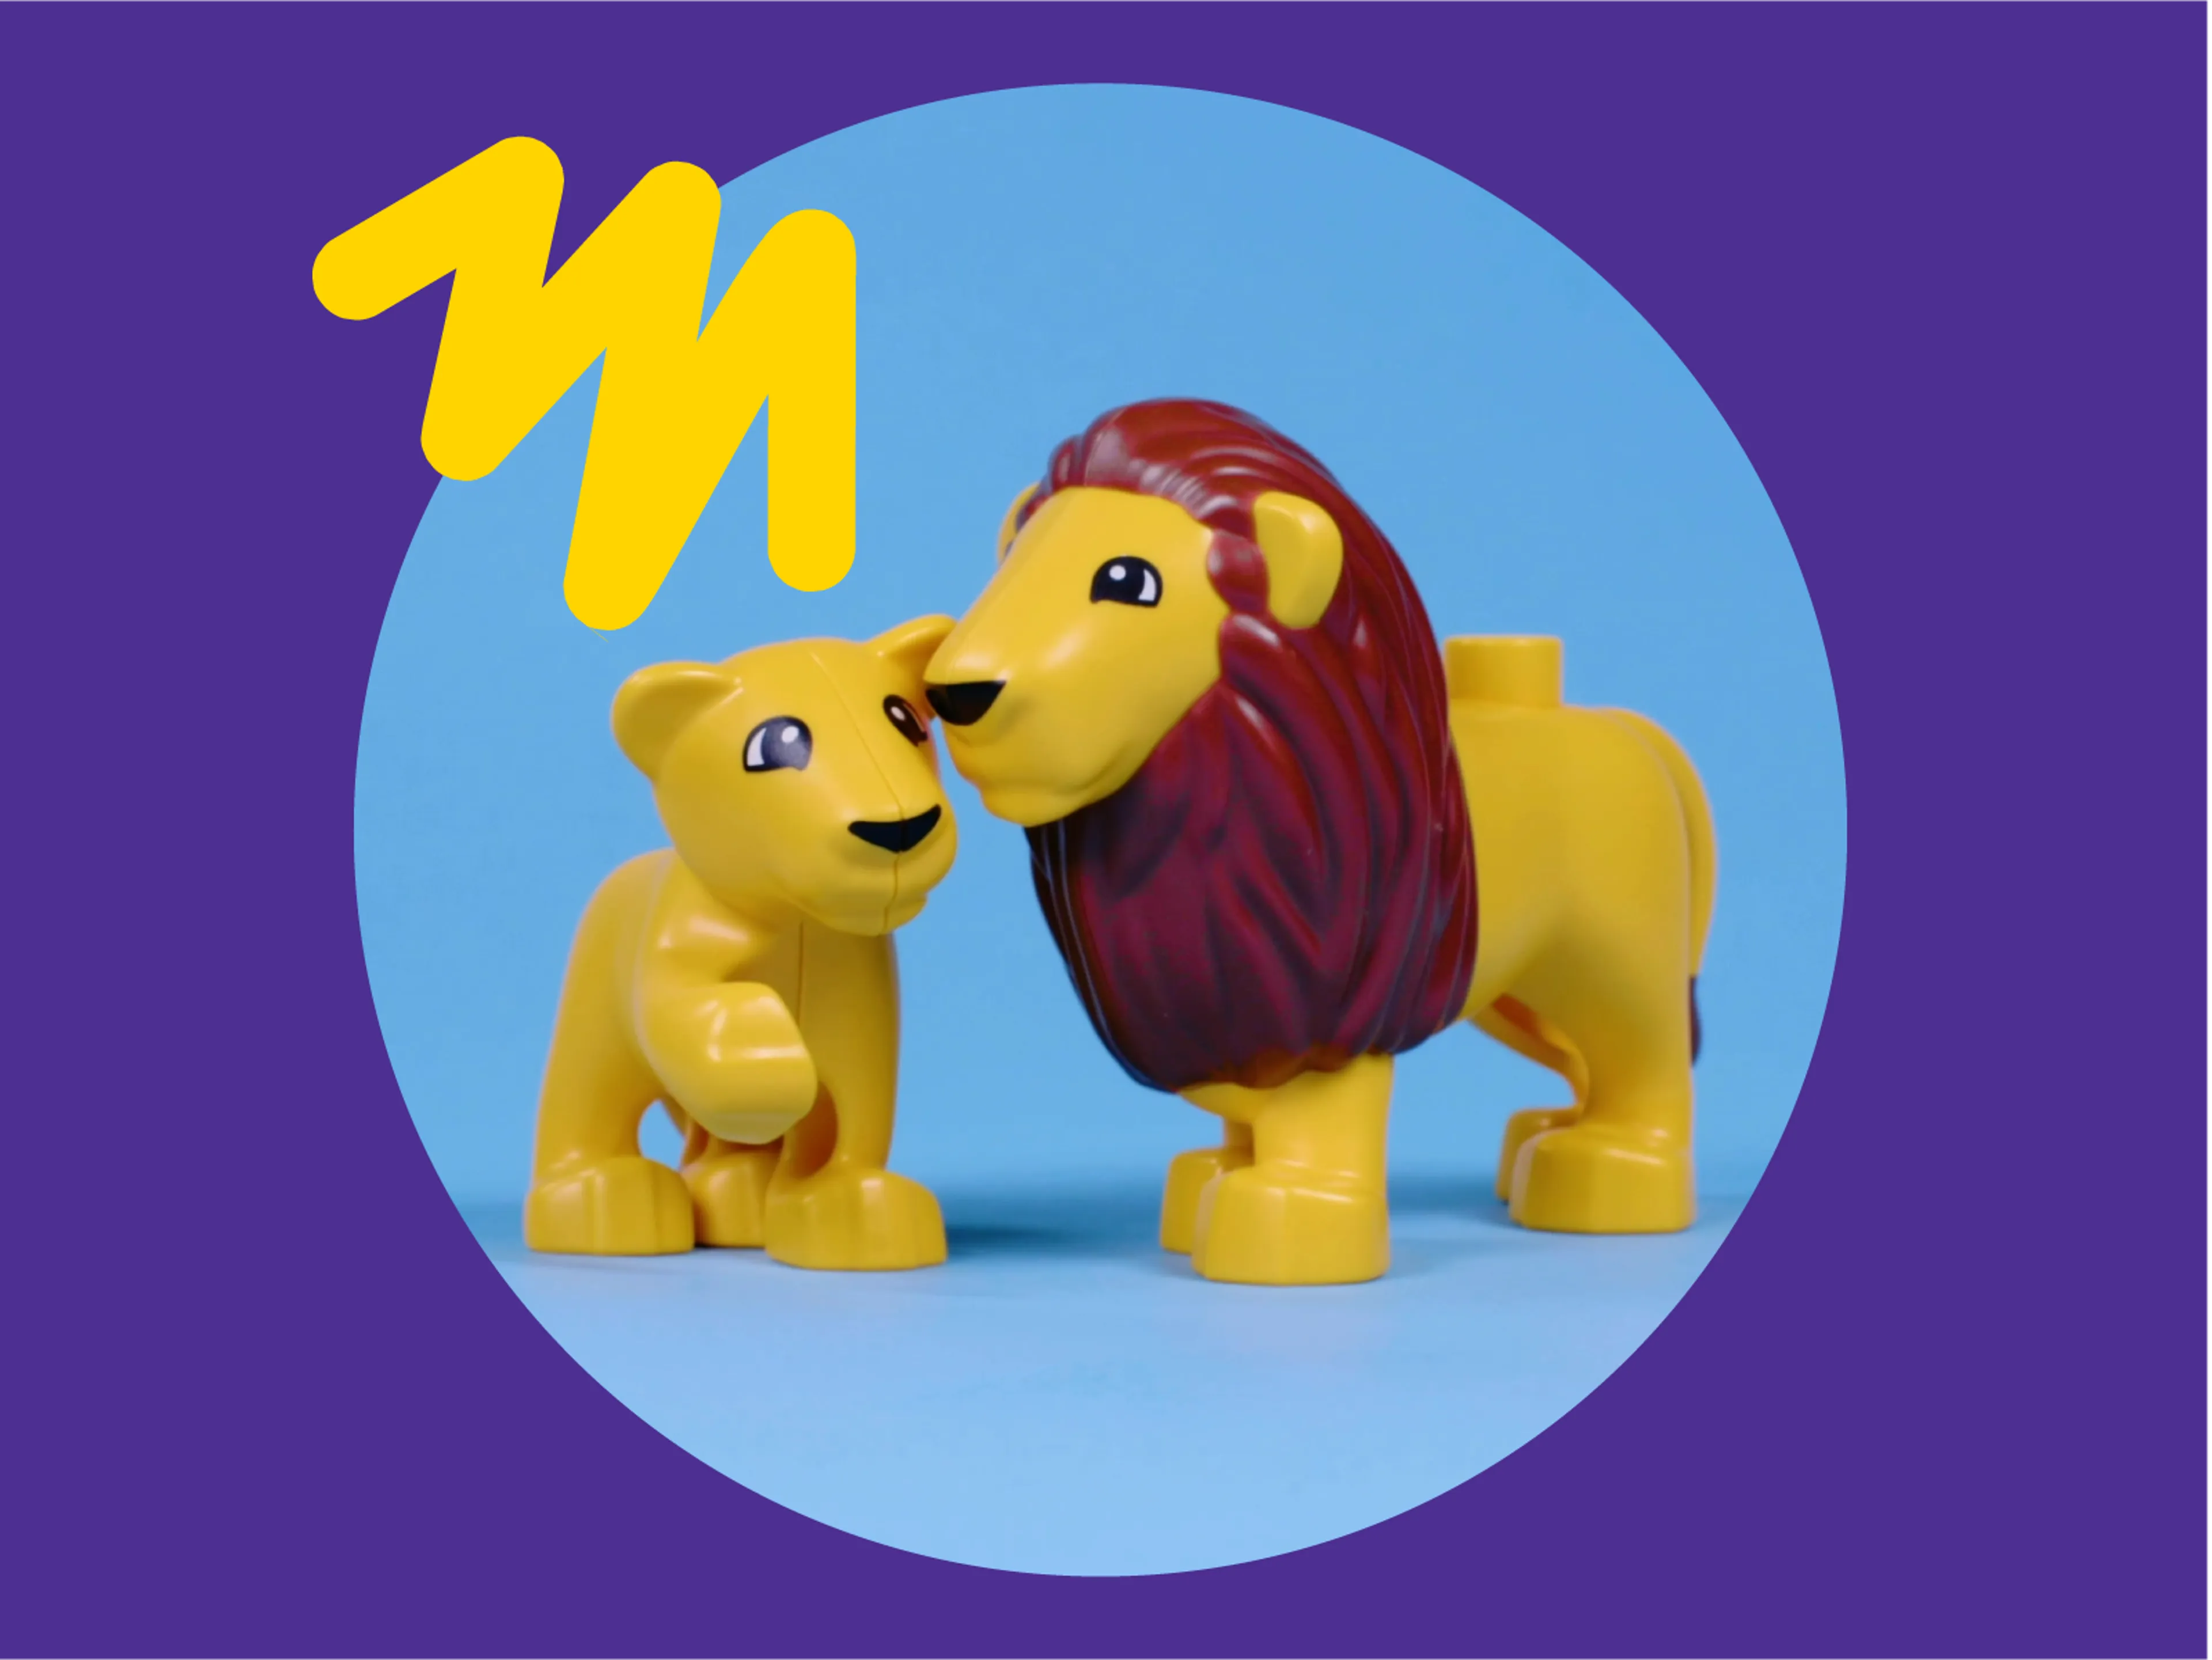 An image of two LEGO DUPLO lions